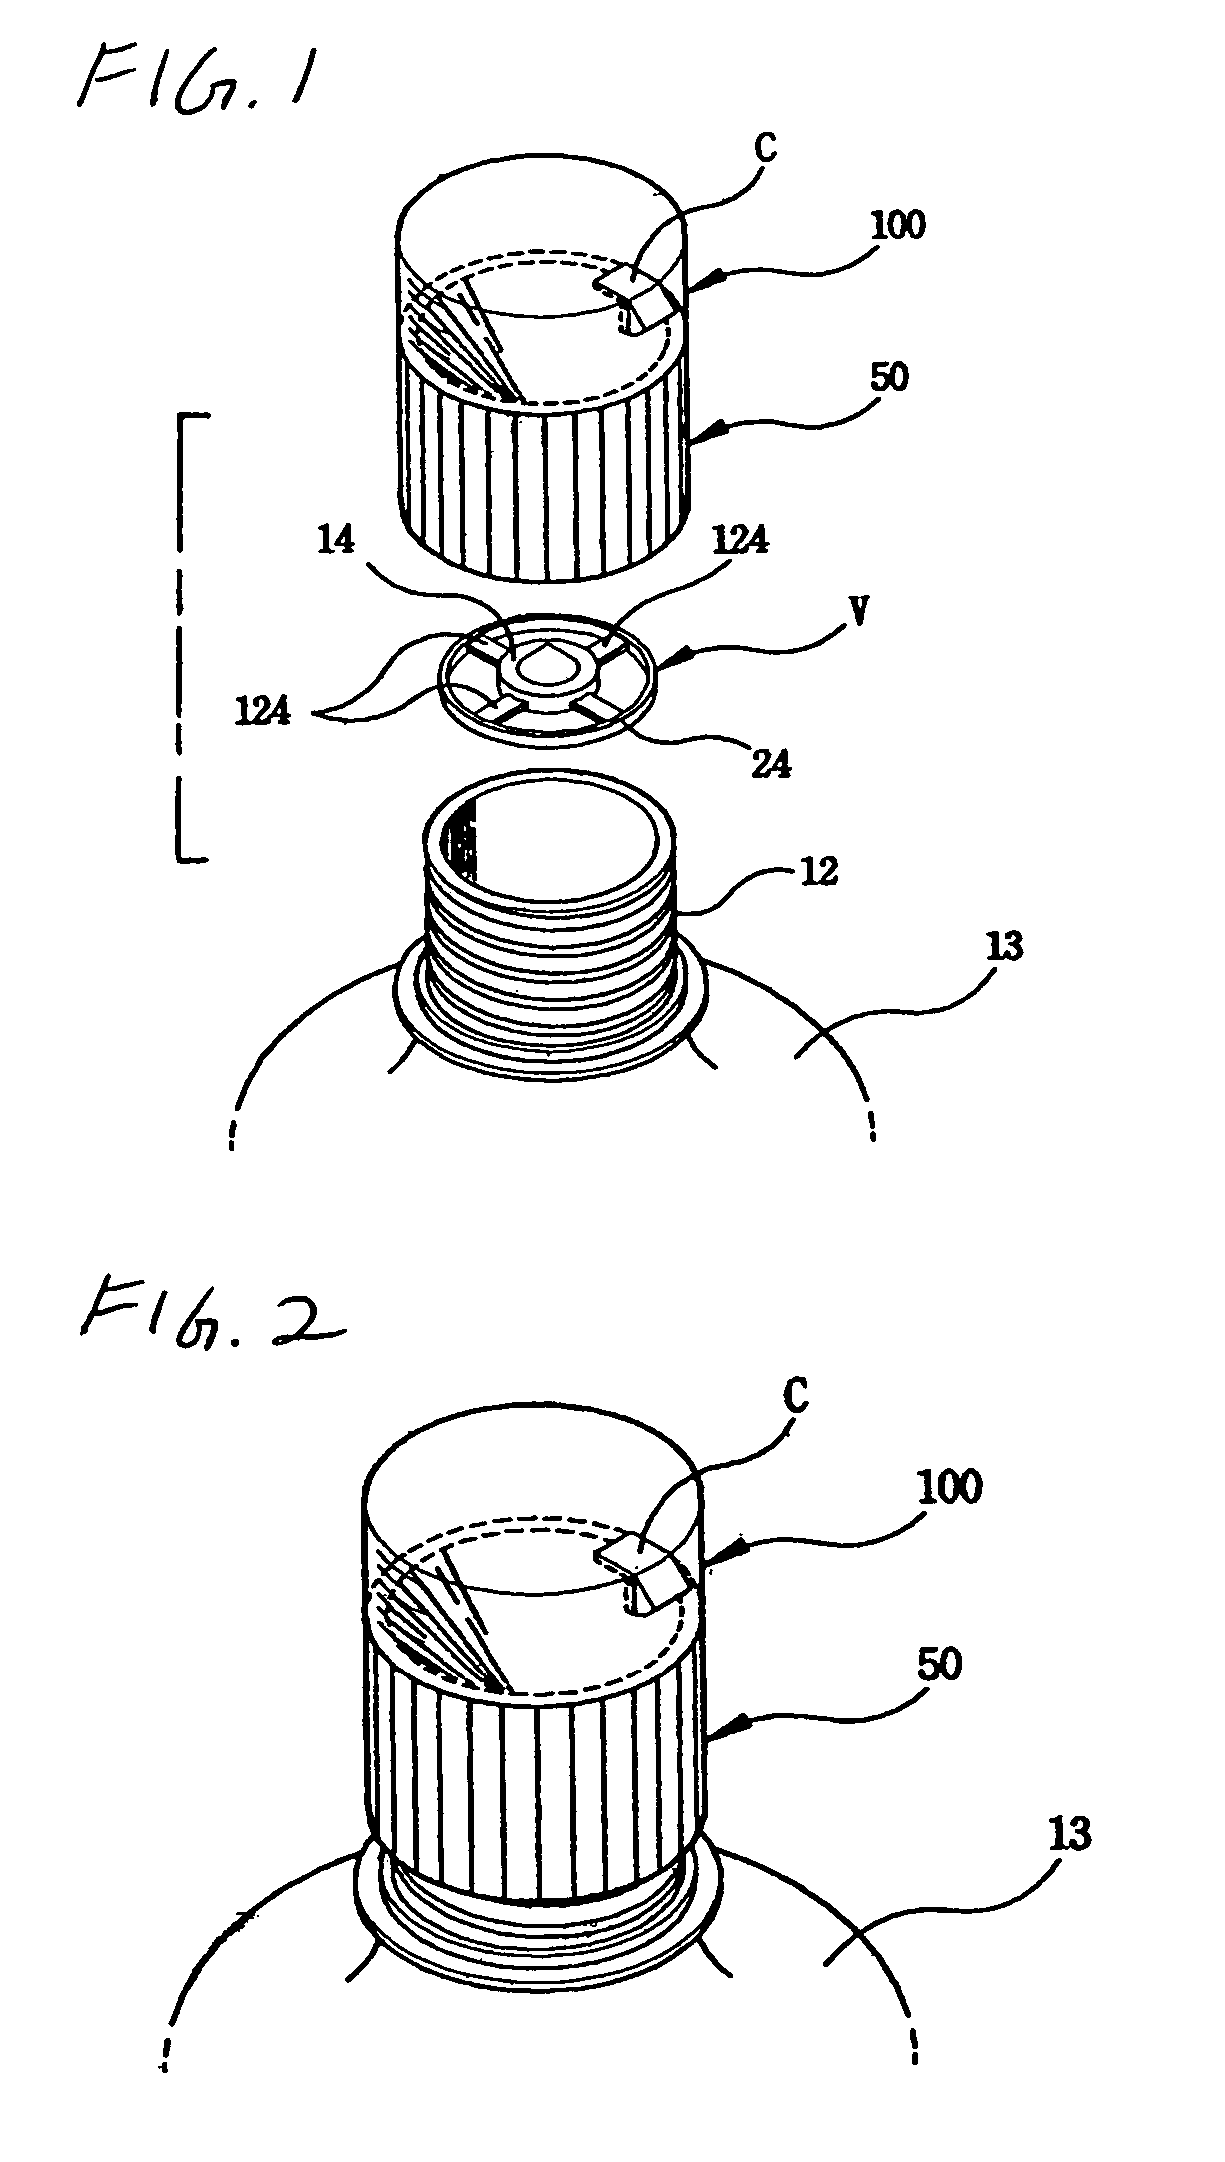 Cap device for mixing different kinds of materials separately contained therein and in bottle